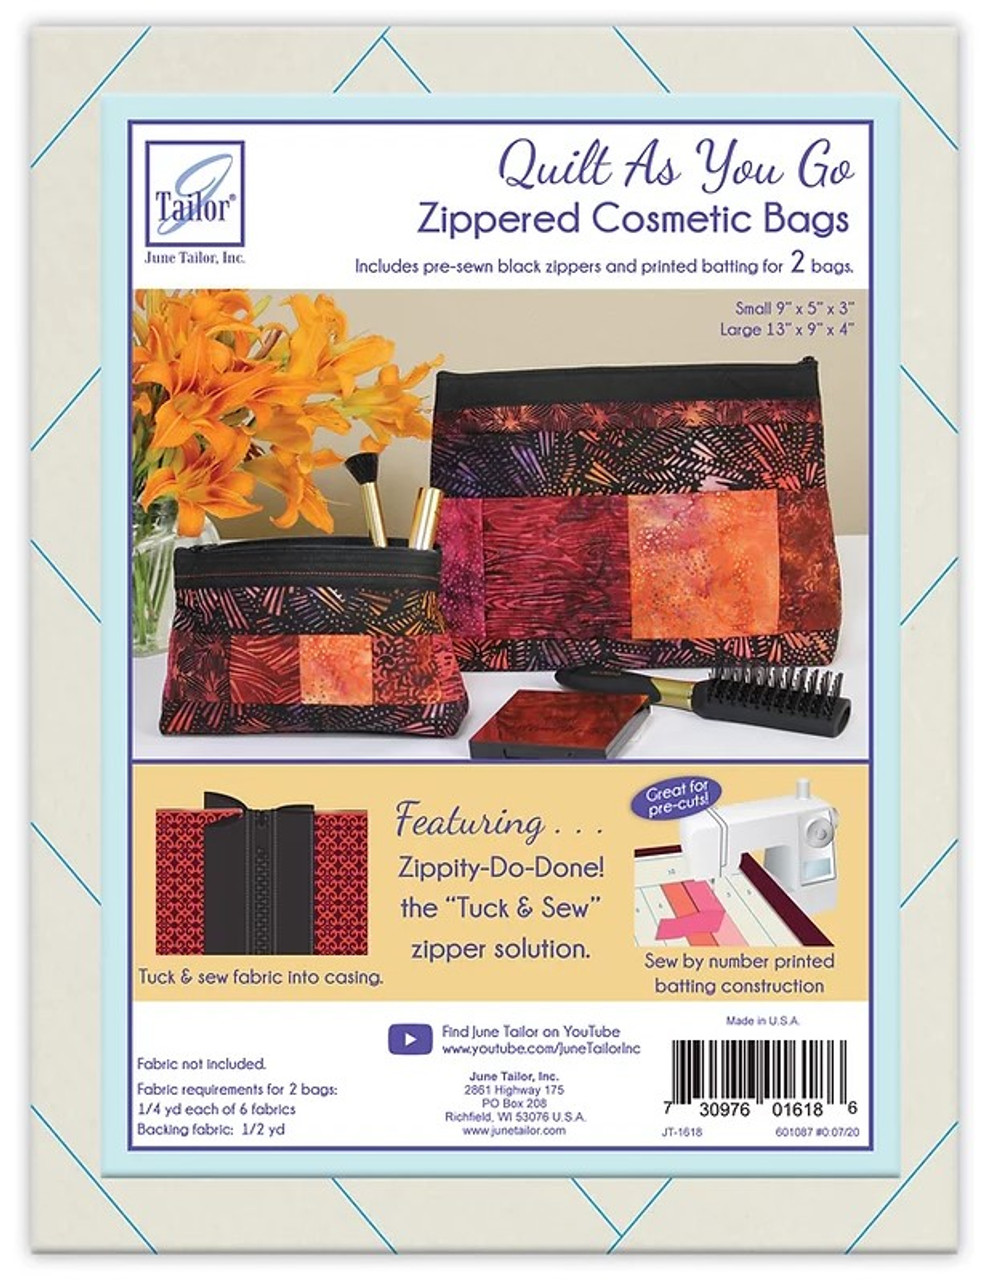 June Tailor, Quilt As You Go, Zippered Cosmetic Bags, JT-1618